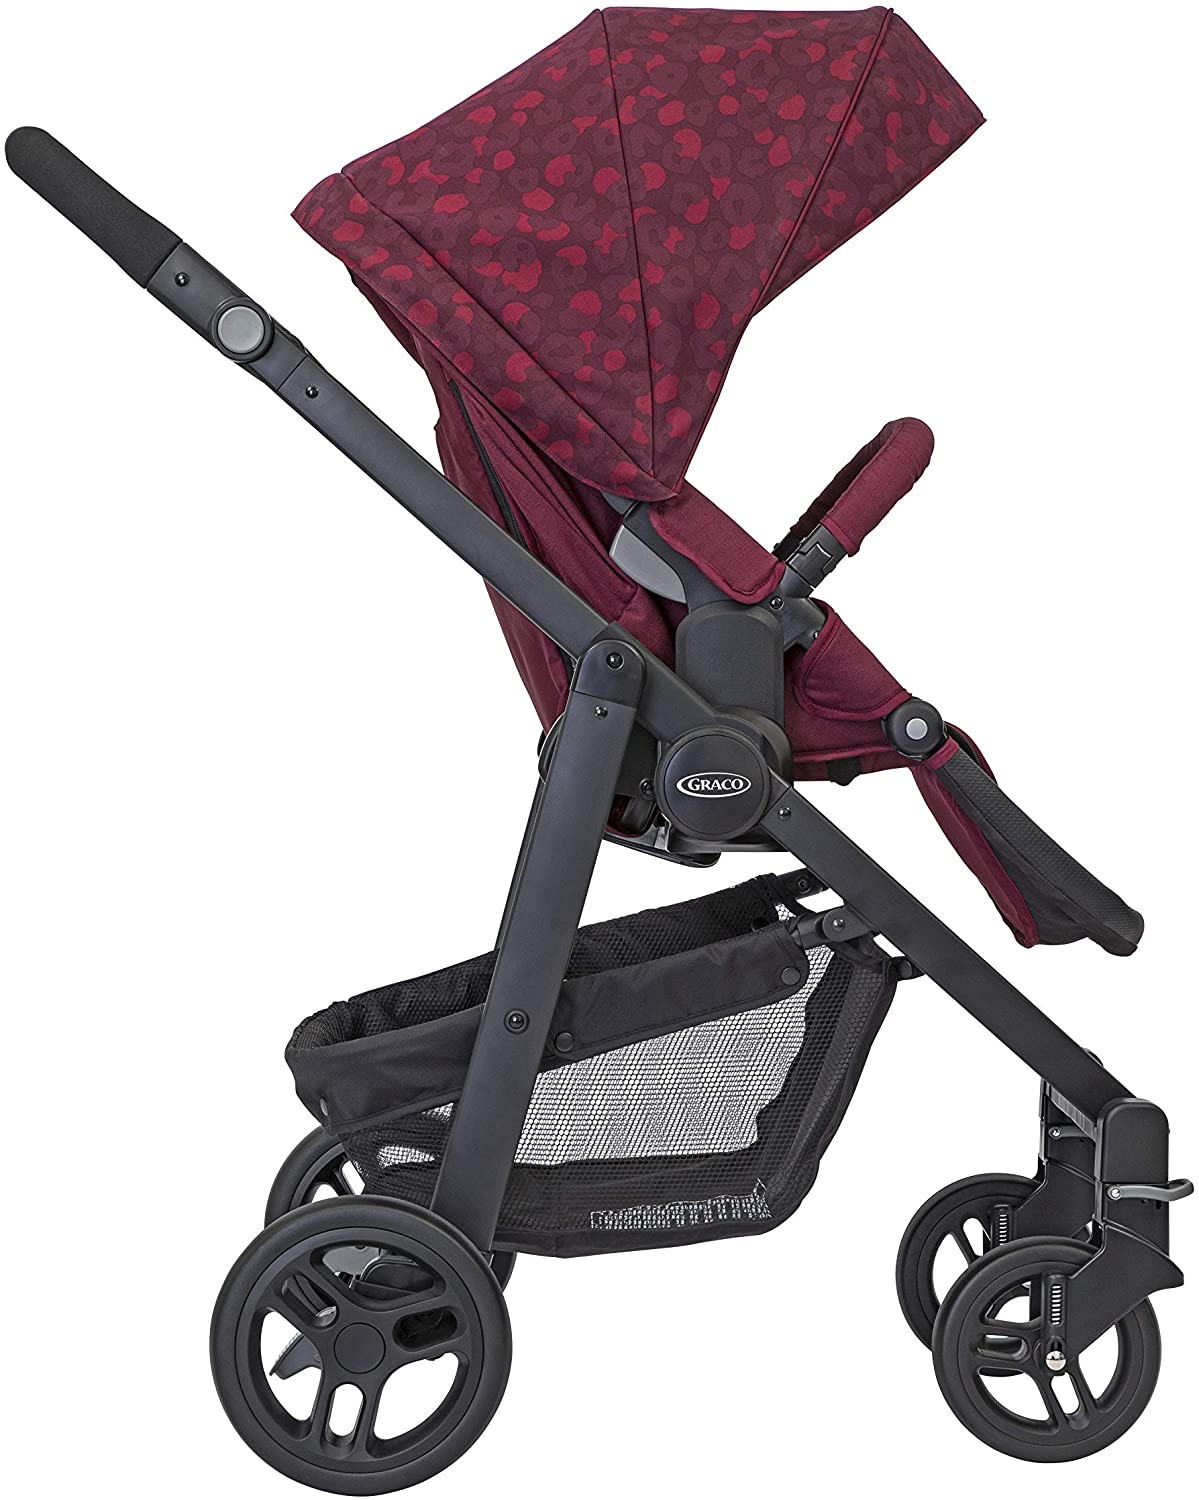 Red Leopard Graco Evo Pushchair inc Apron and Raincover